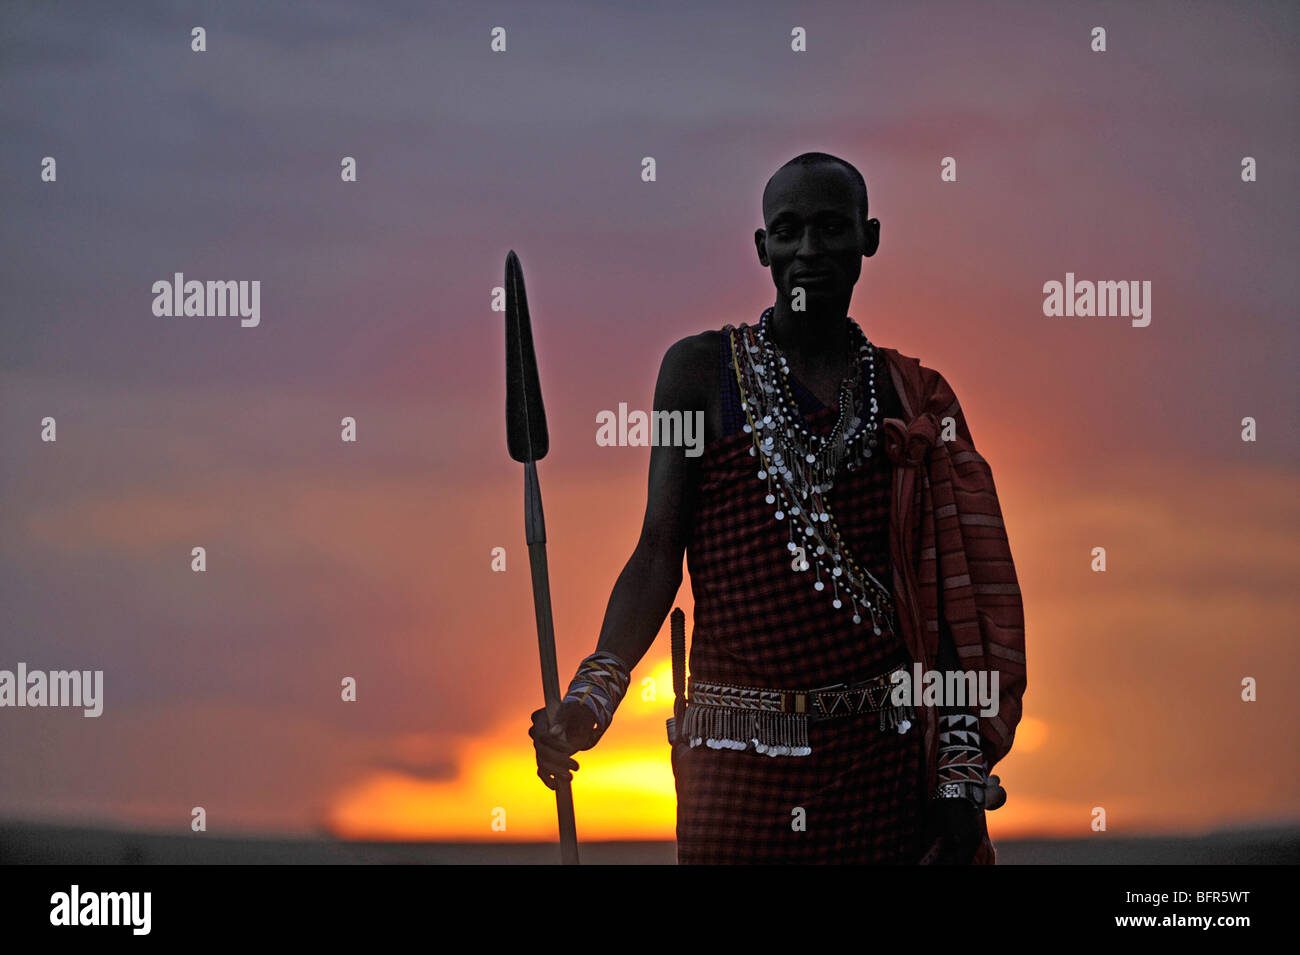 Maasai moran or warrior with spear against the setting sun Stock Photo